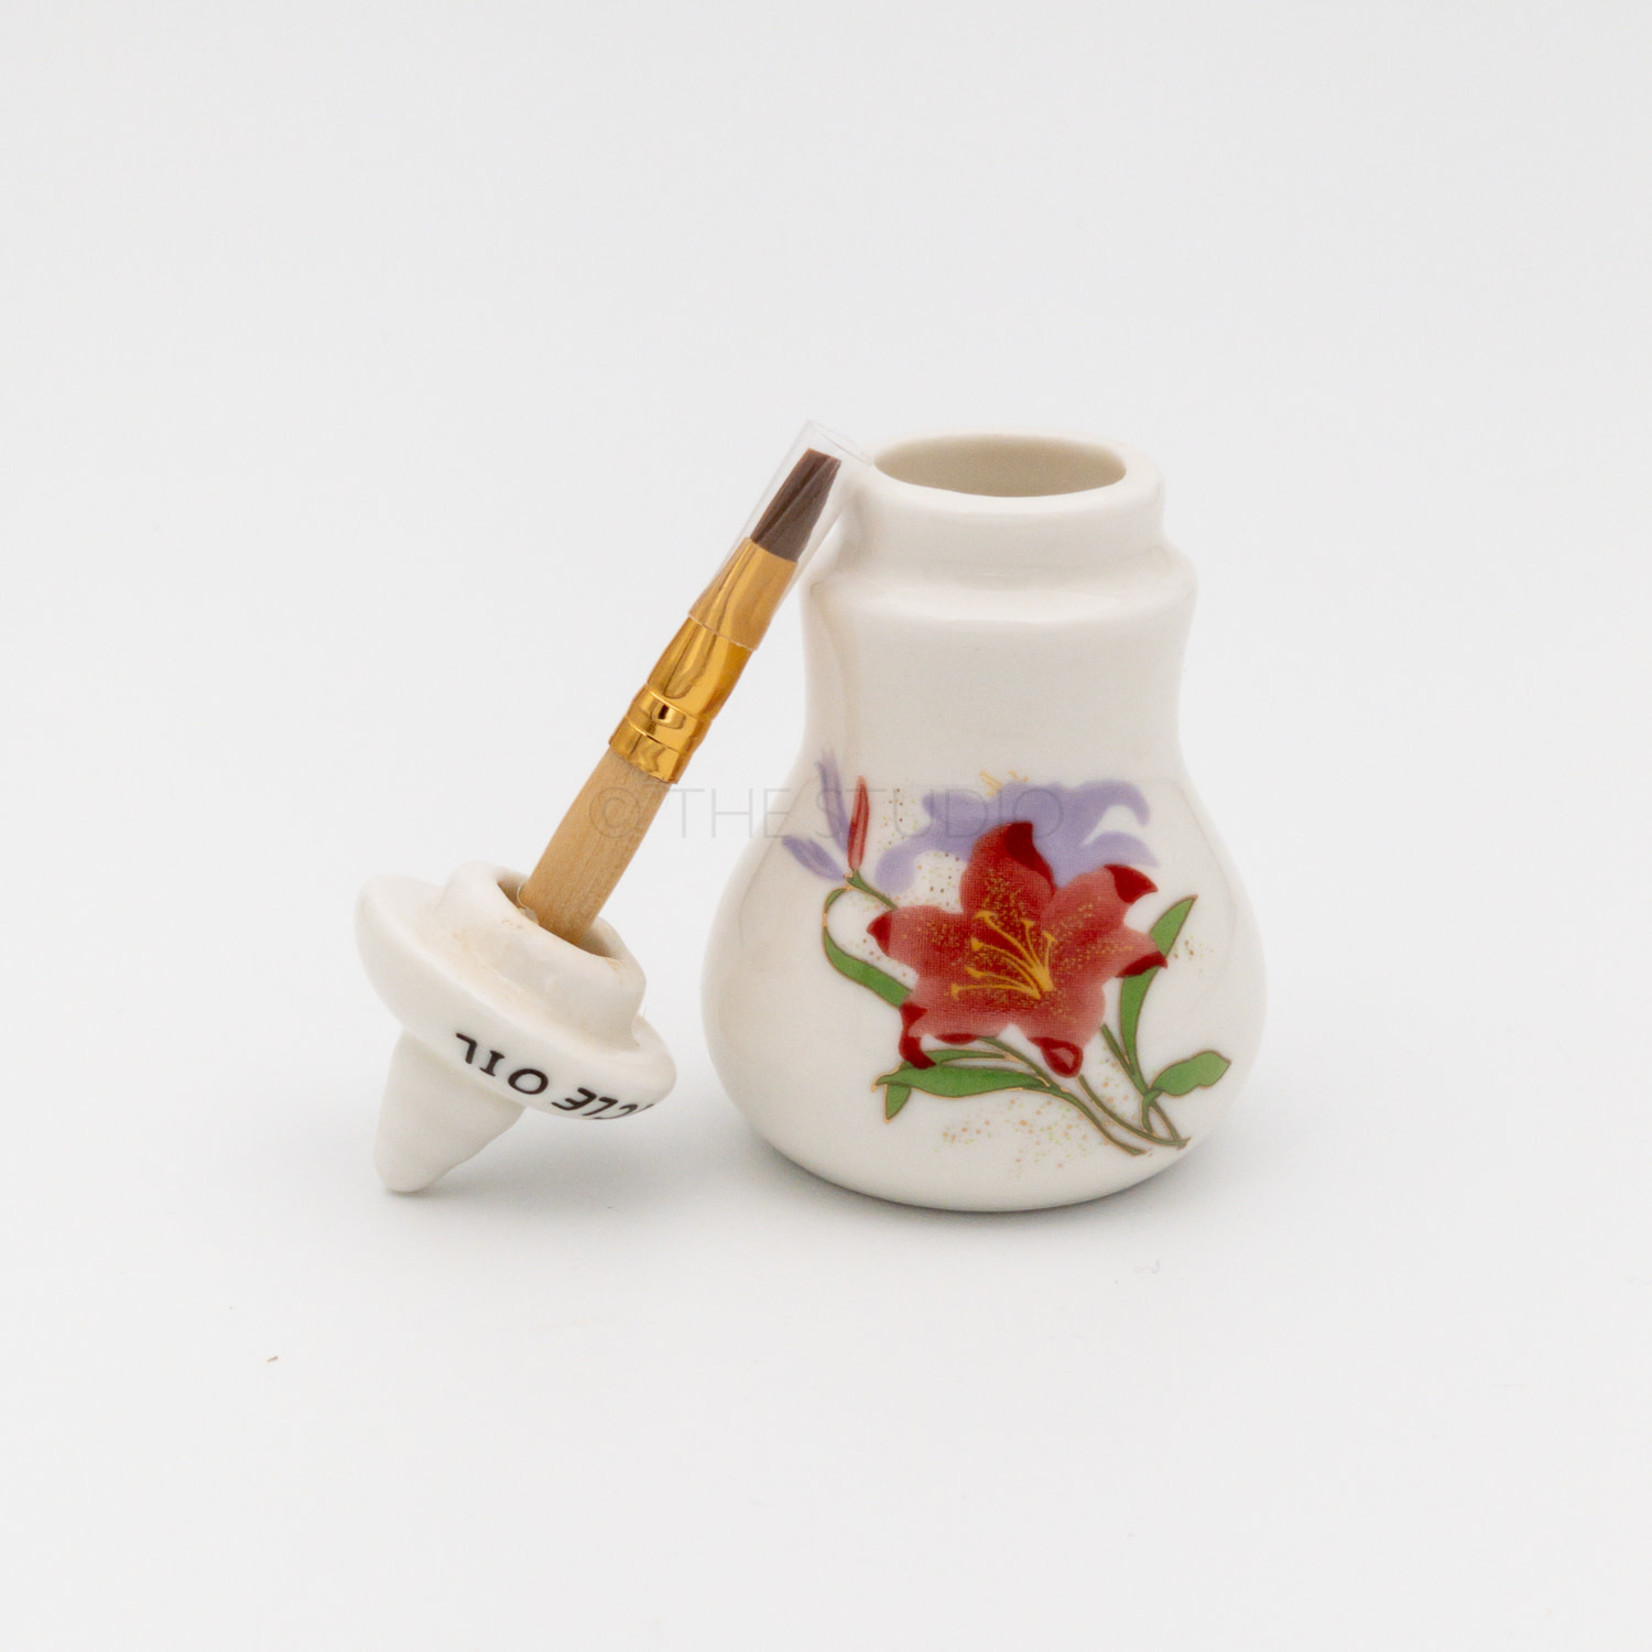 DL - Cuticle Oil Jar with Brush - Small Ceramic